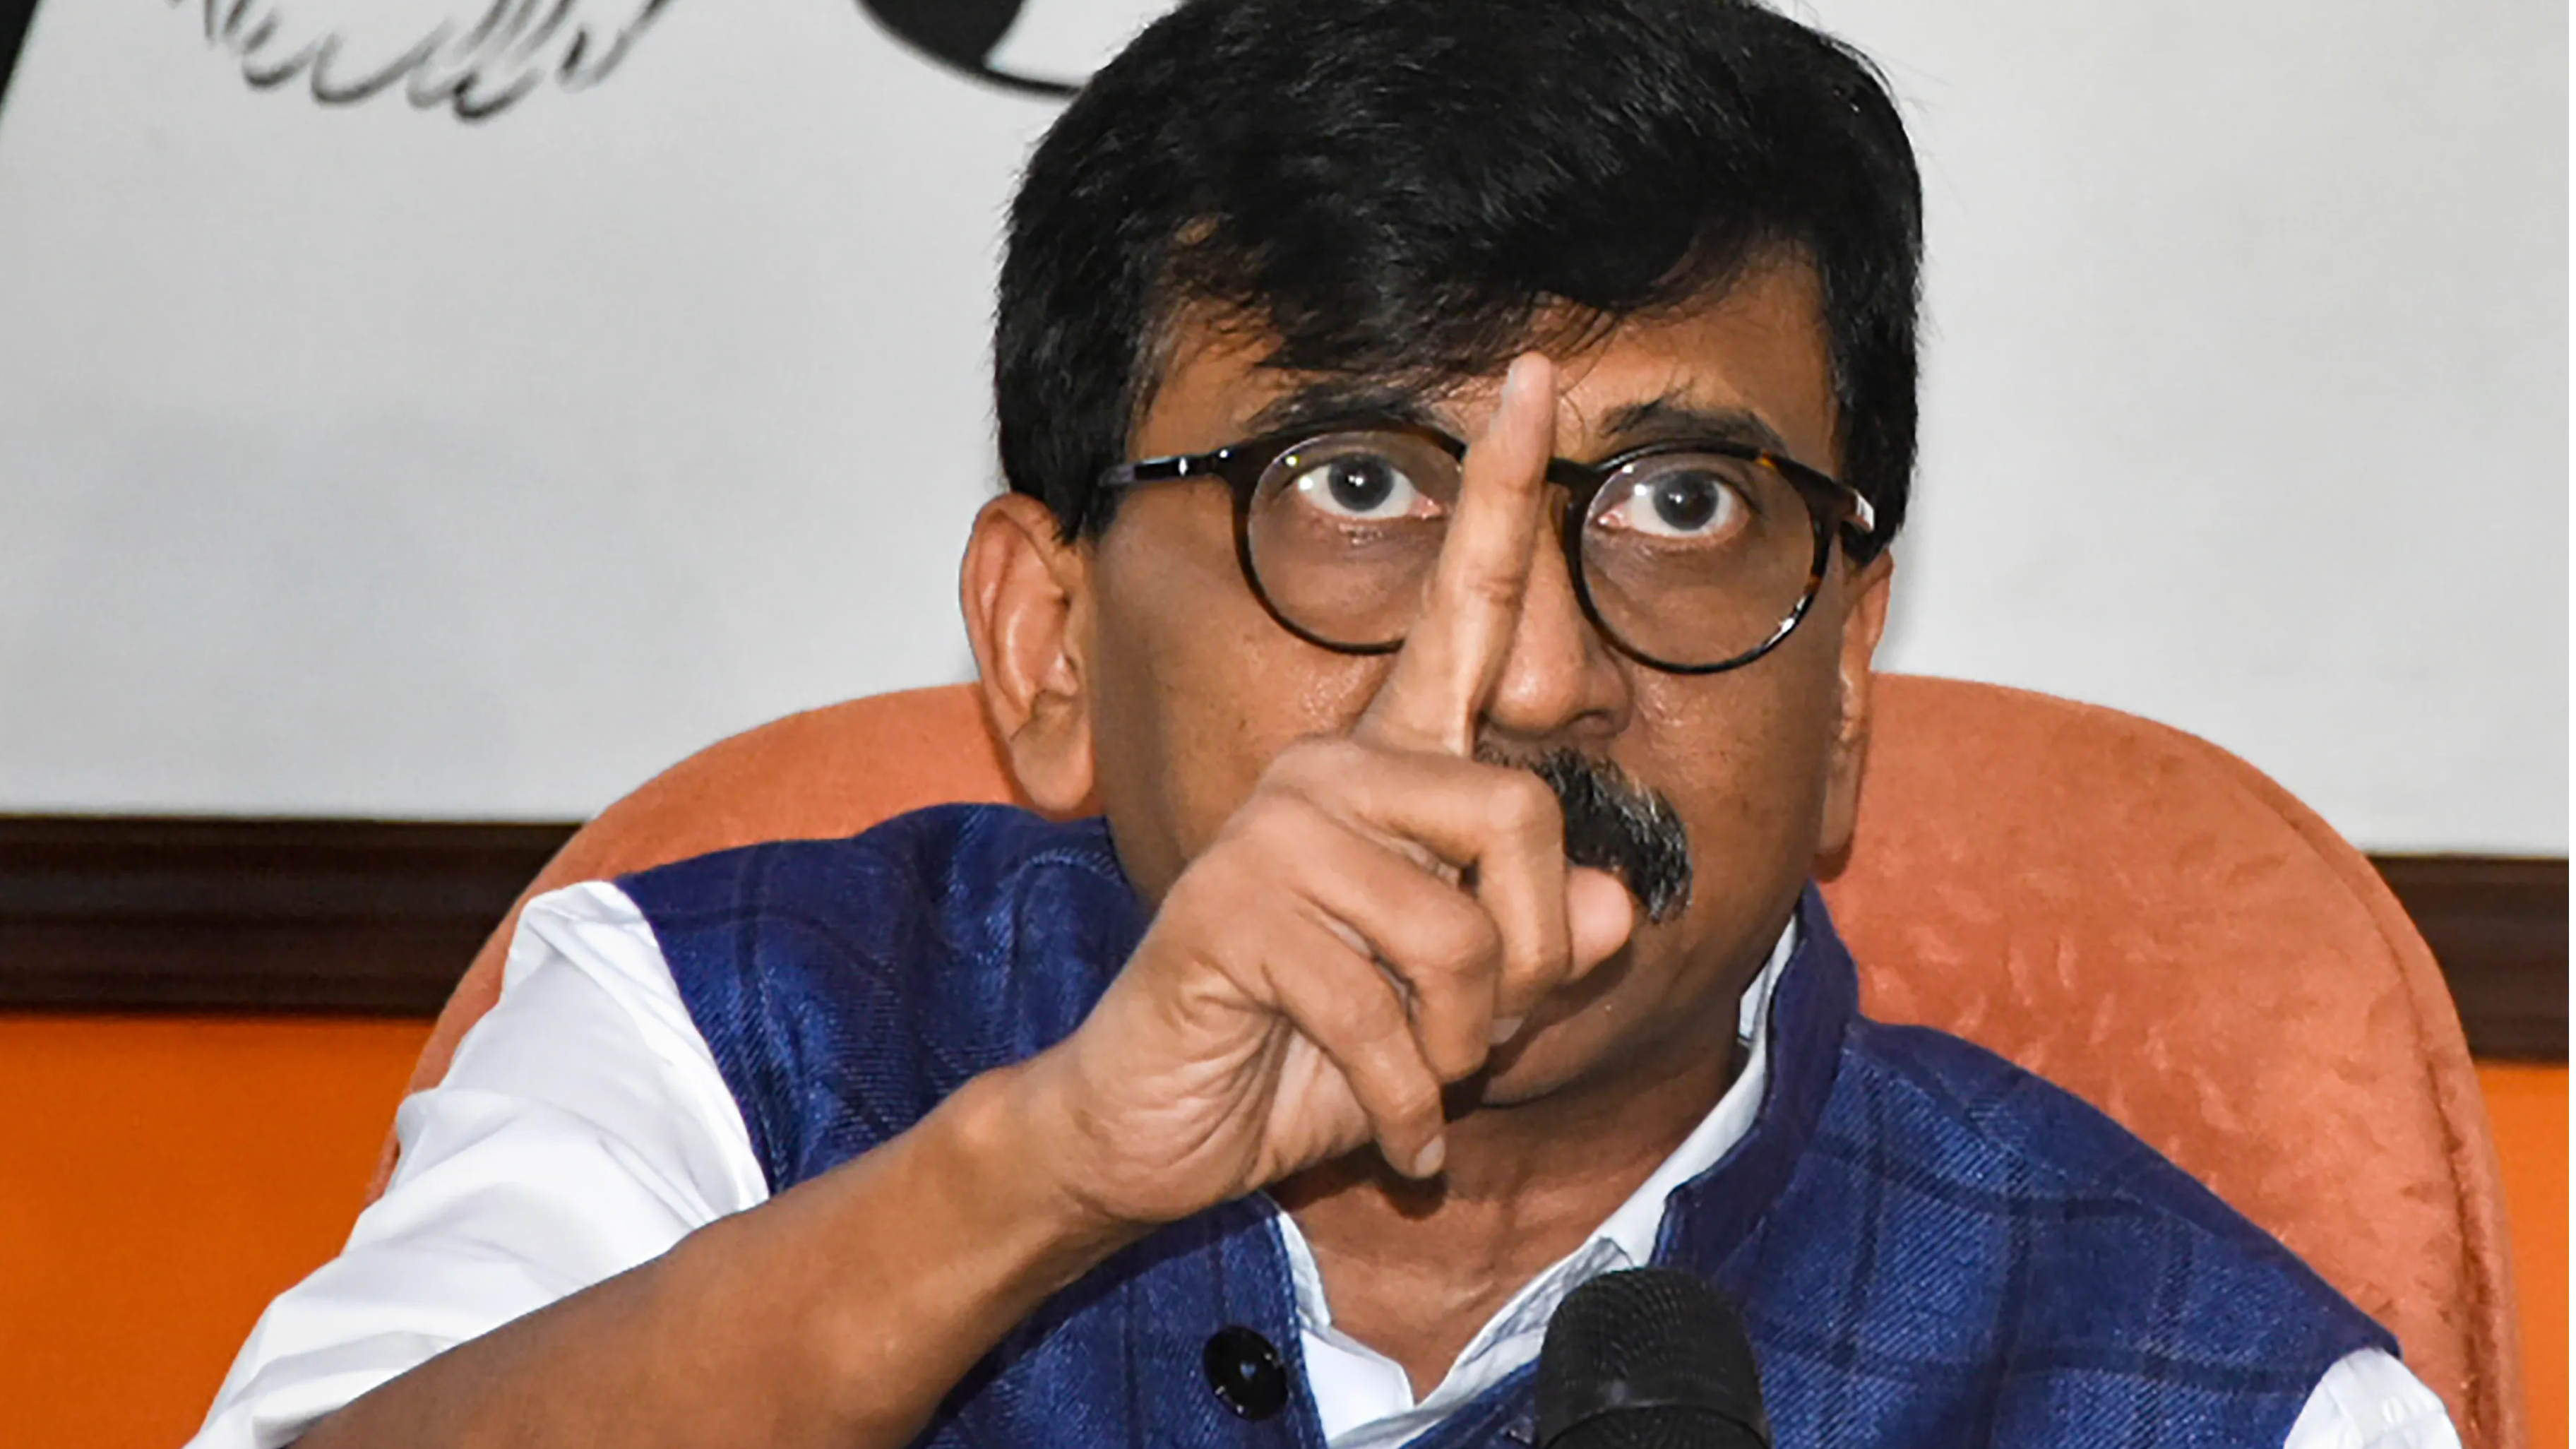 Had alerted that Sachin Waze could create problems for Maha govt: Sanjay Raut